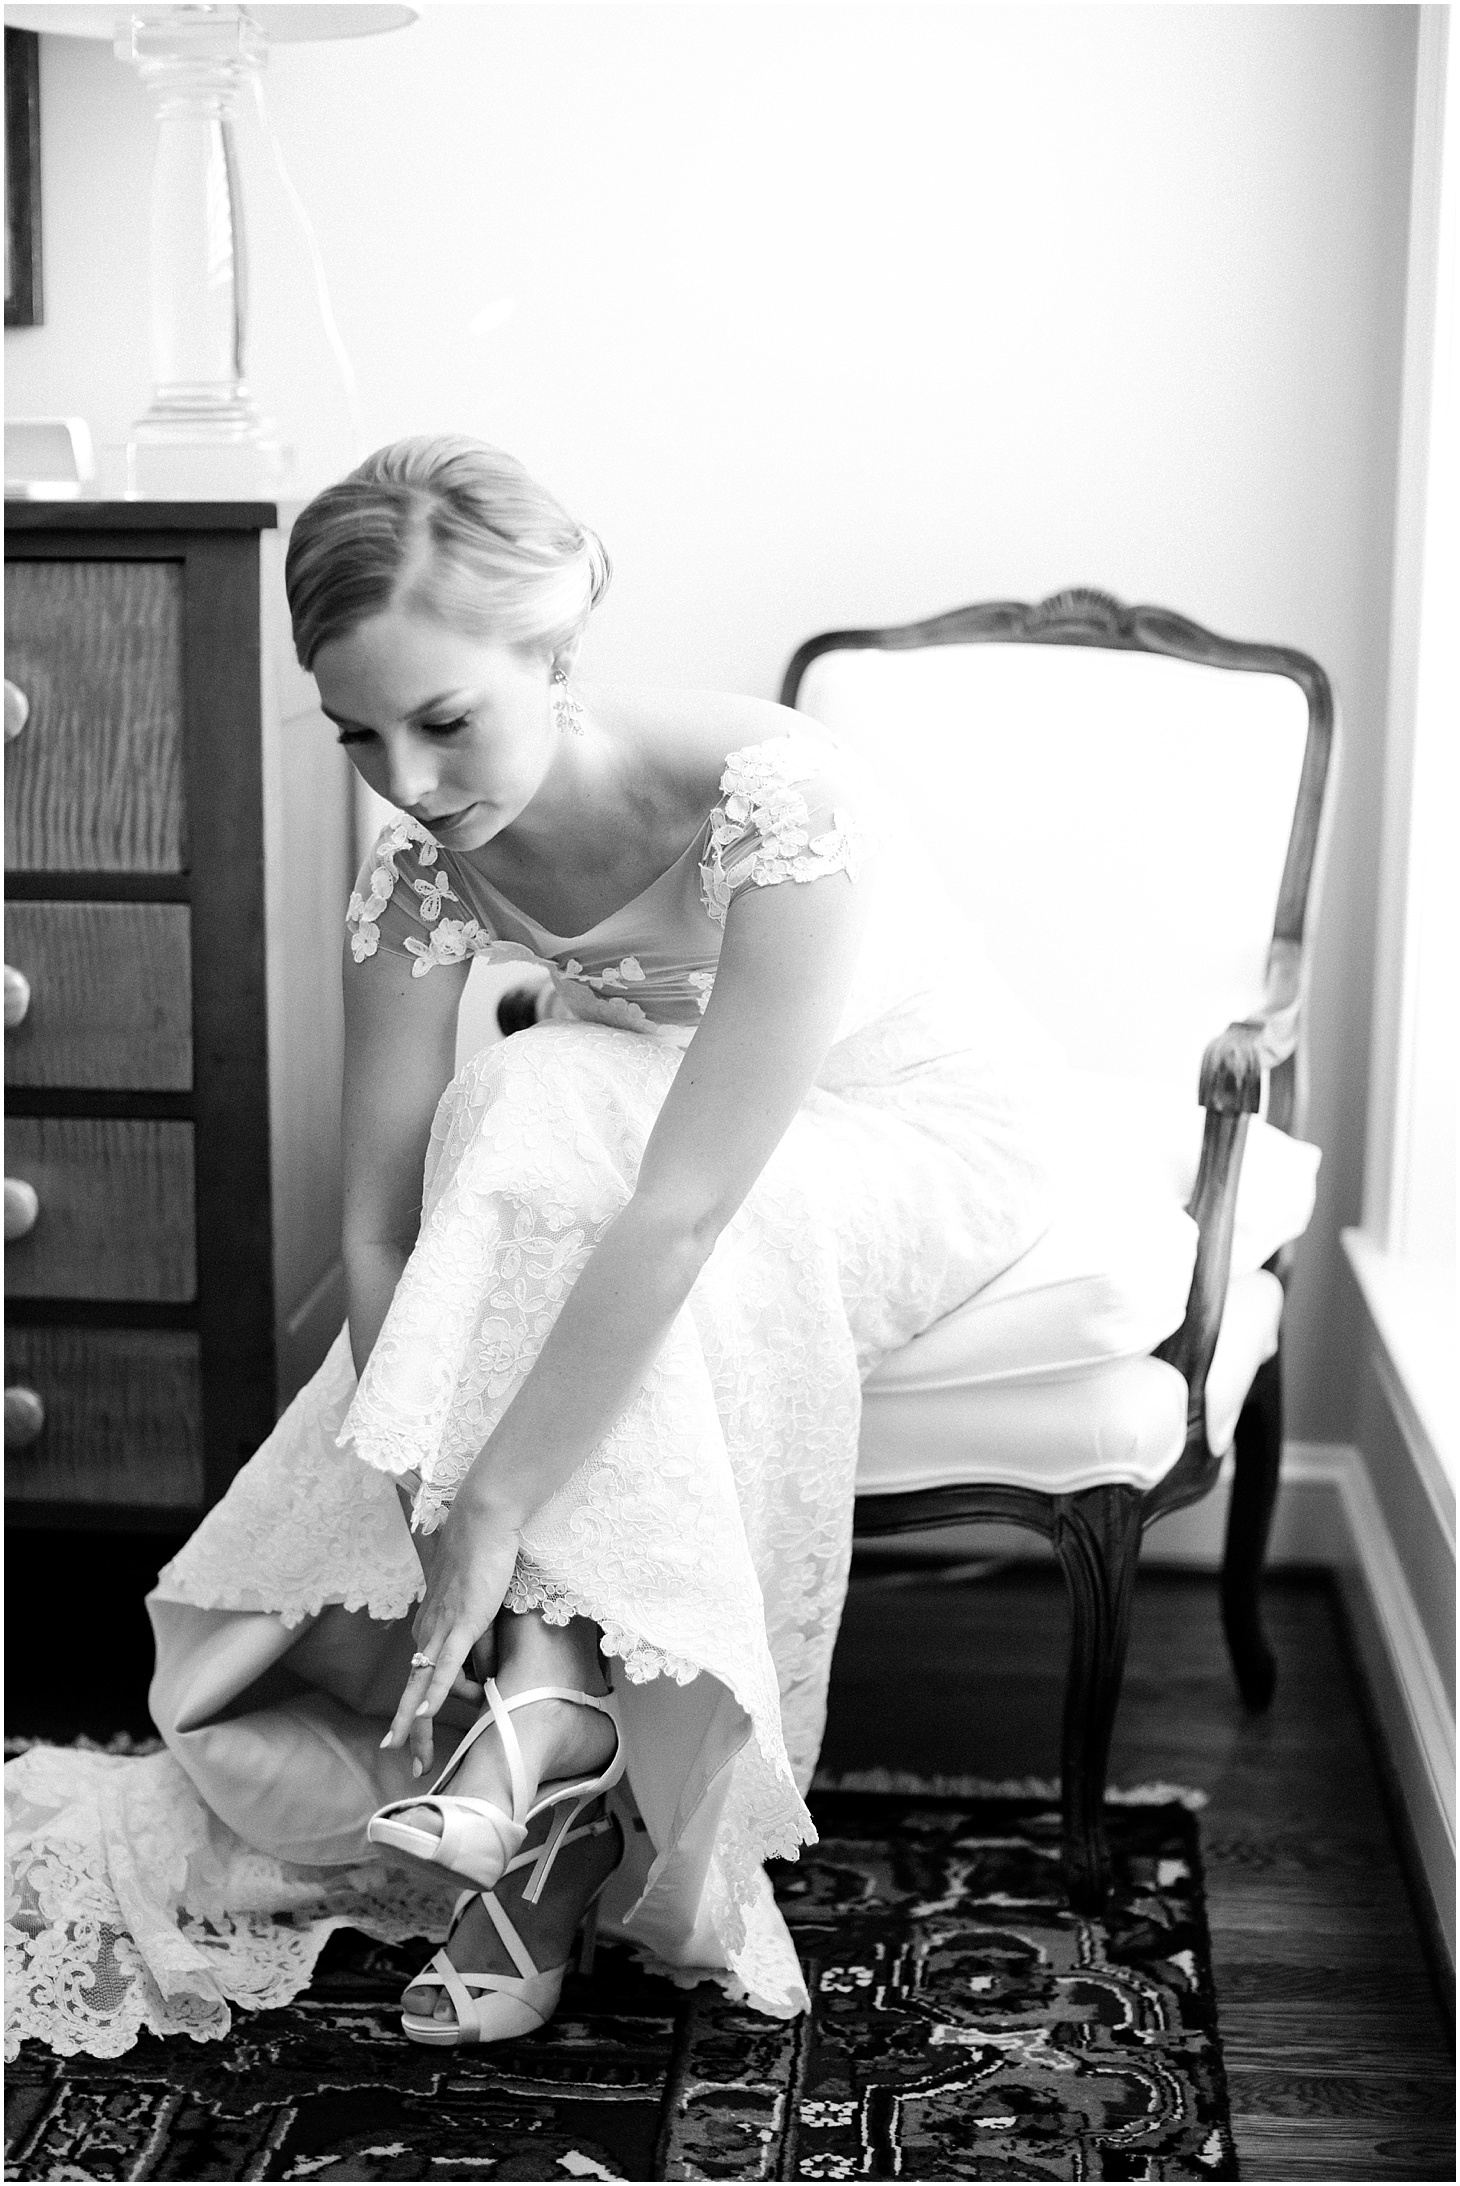 Bride Getting Ready in Romona Keveza Gown and Kate Spade Shoes | Wedding Ceremony at Old Presbyterian Meeting House | Southern Black Tie wedding at St. Regis DC in Dusty Blue and Ivory | Sarah Bradshaw Photography